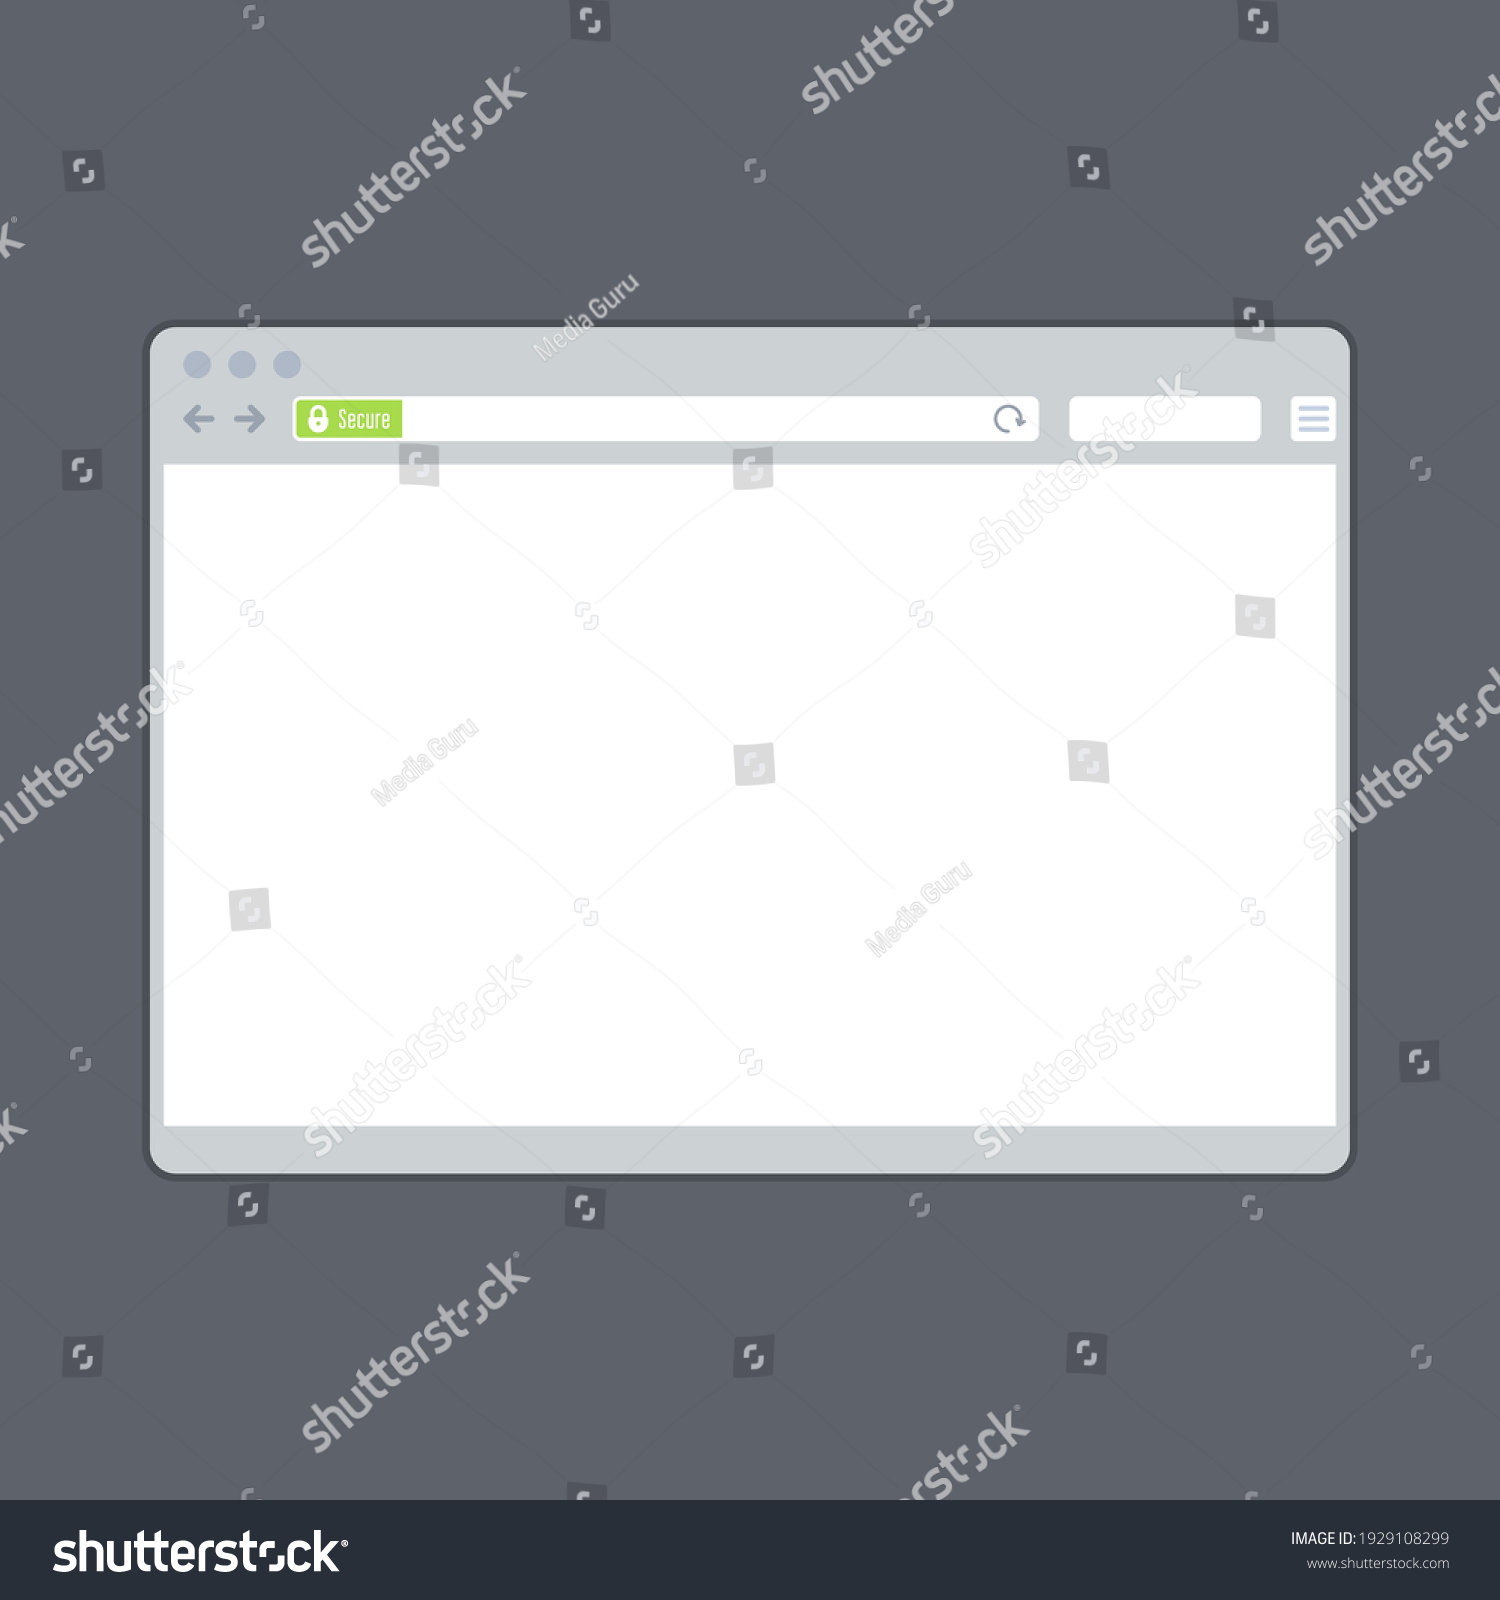 SVG of Blank browser window template with ssl green bar, vector svg